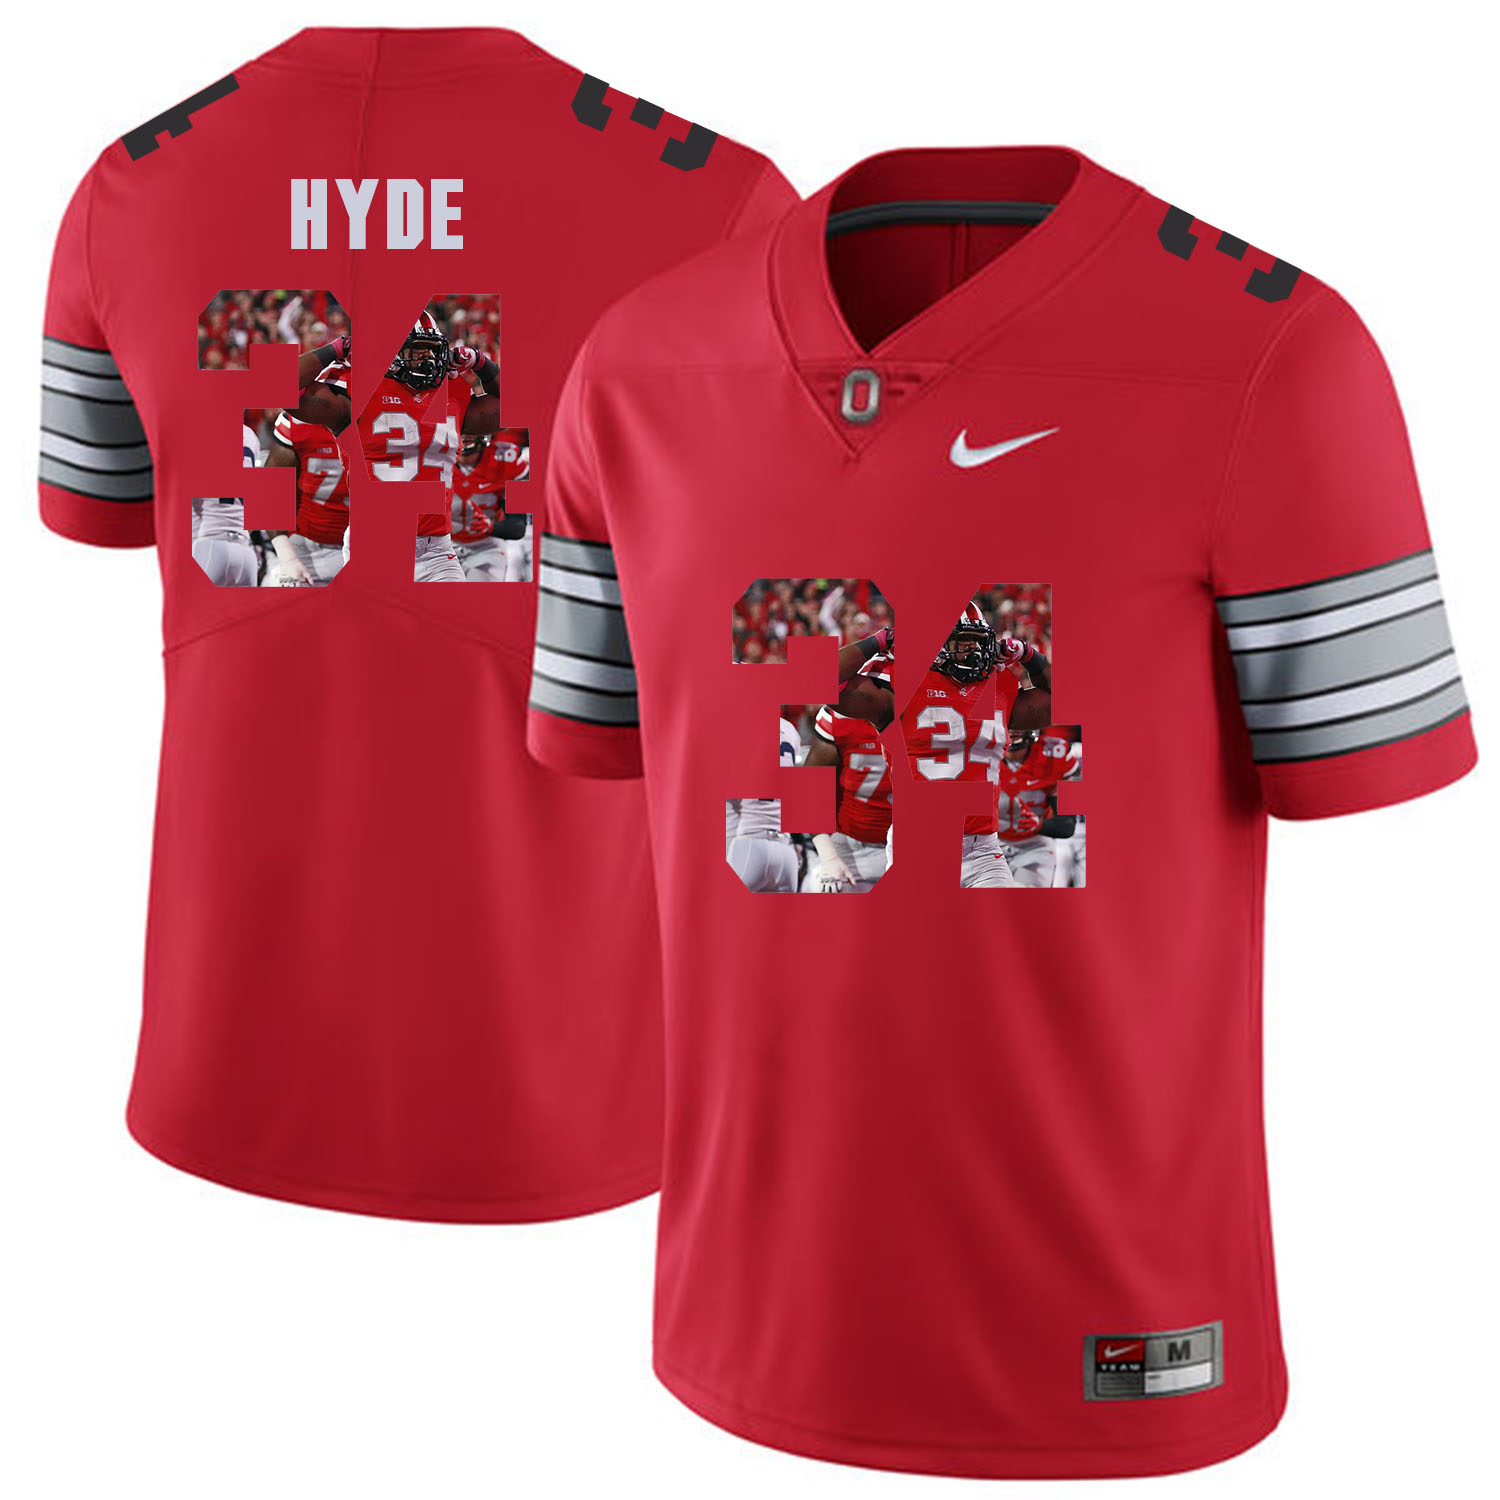 Men Ohio State #34 Hyde Red Fashion Edition Customized NCAA Jerseys->new york yankees->MLB Jersey